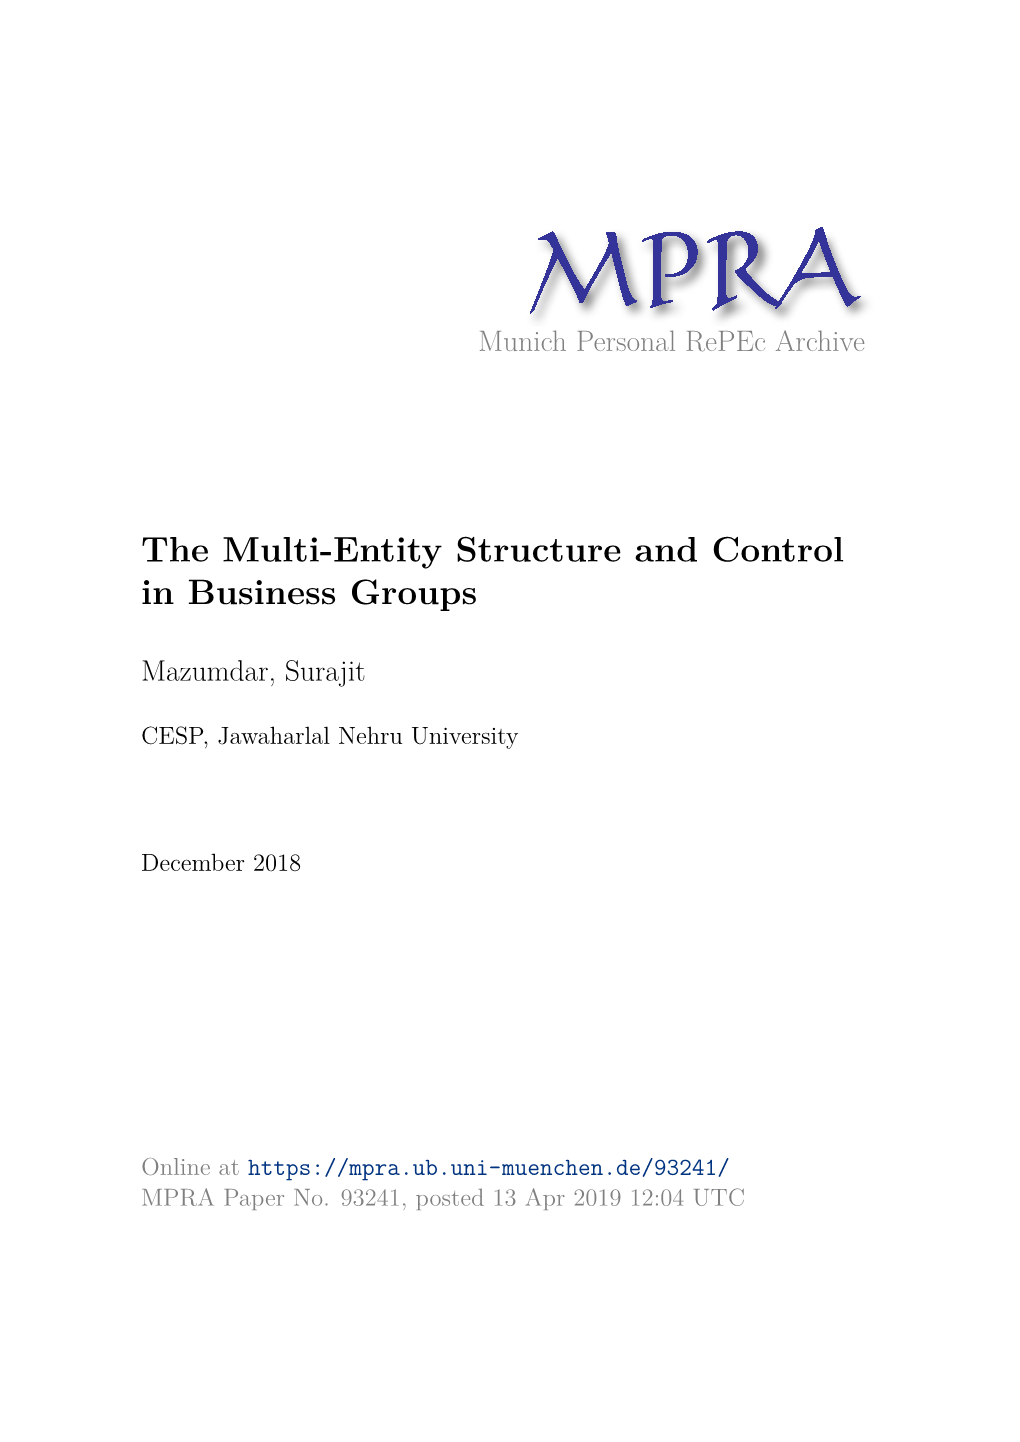 The Multi-Entity Structure and Control in Business Groups